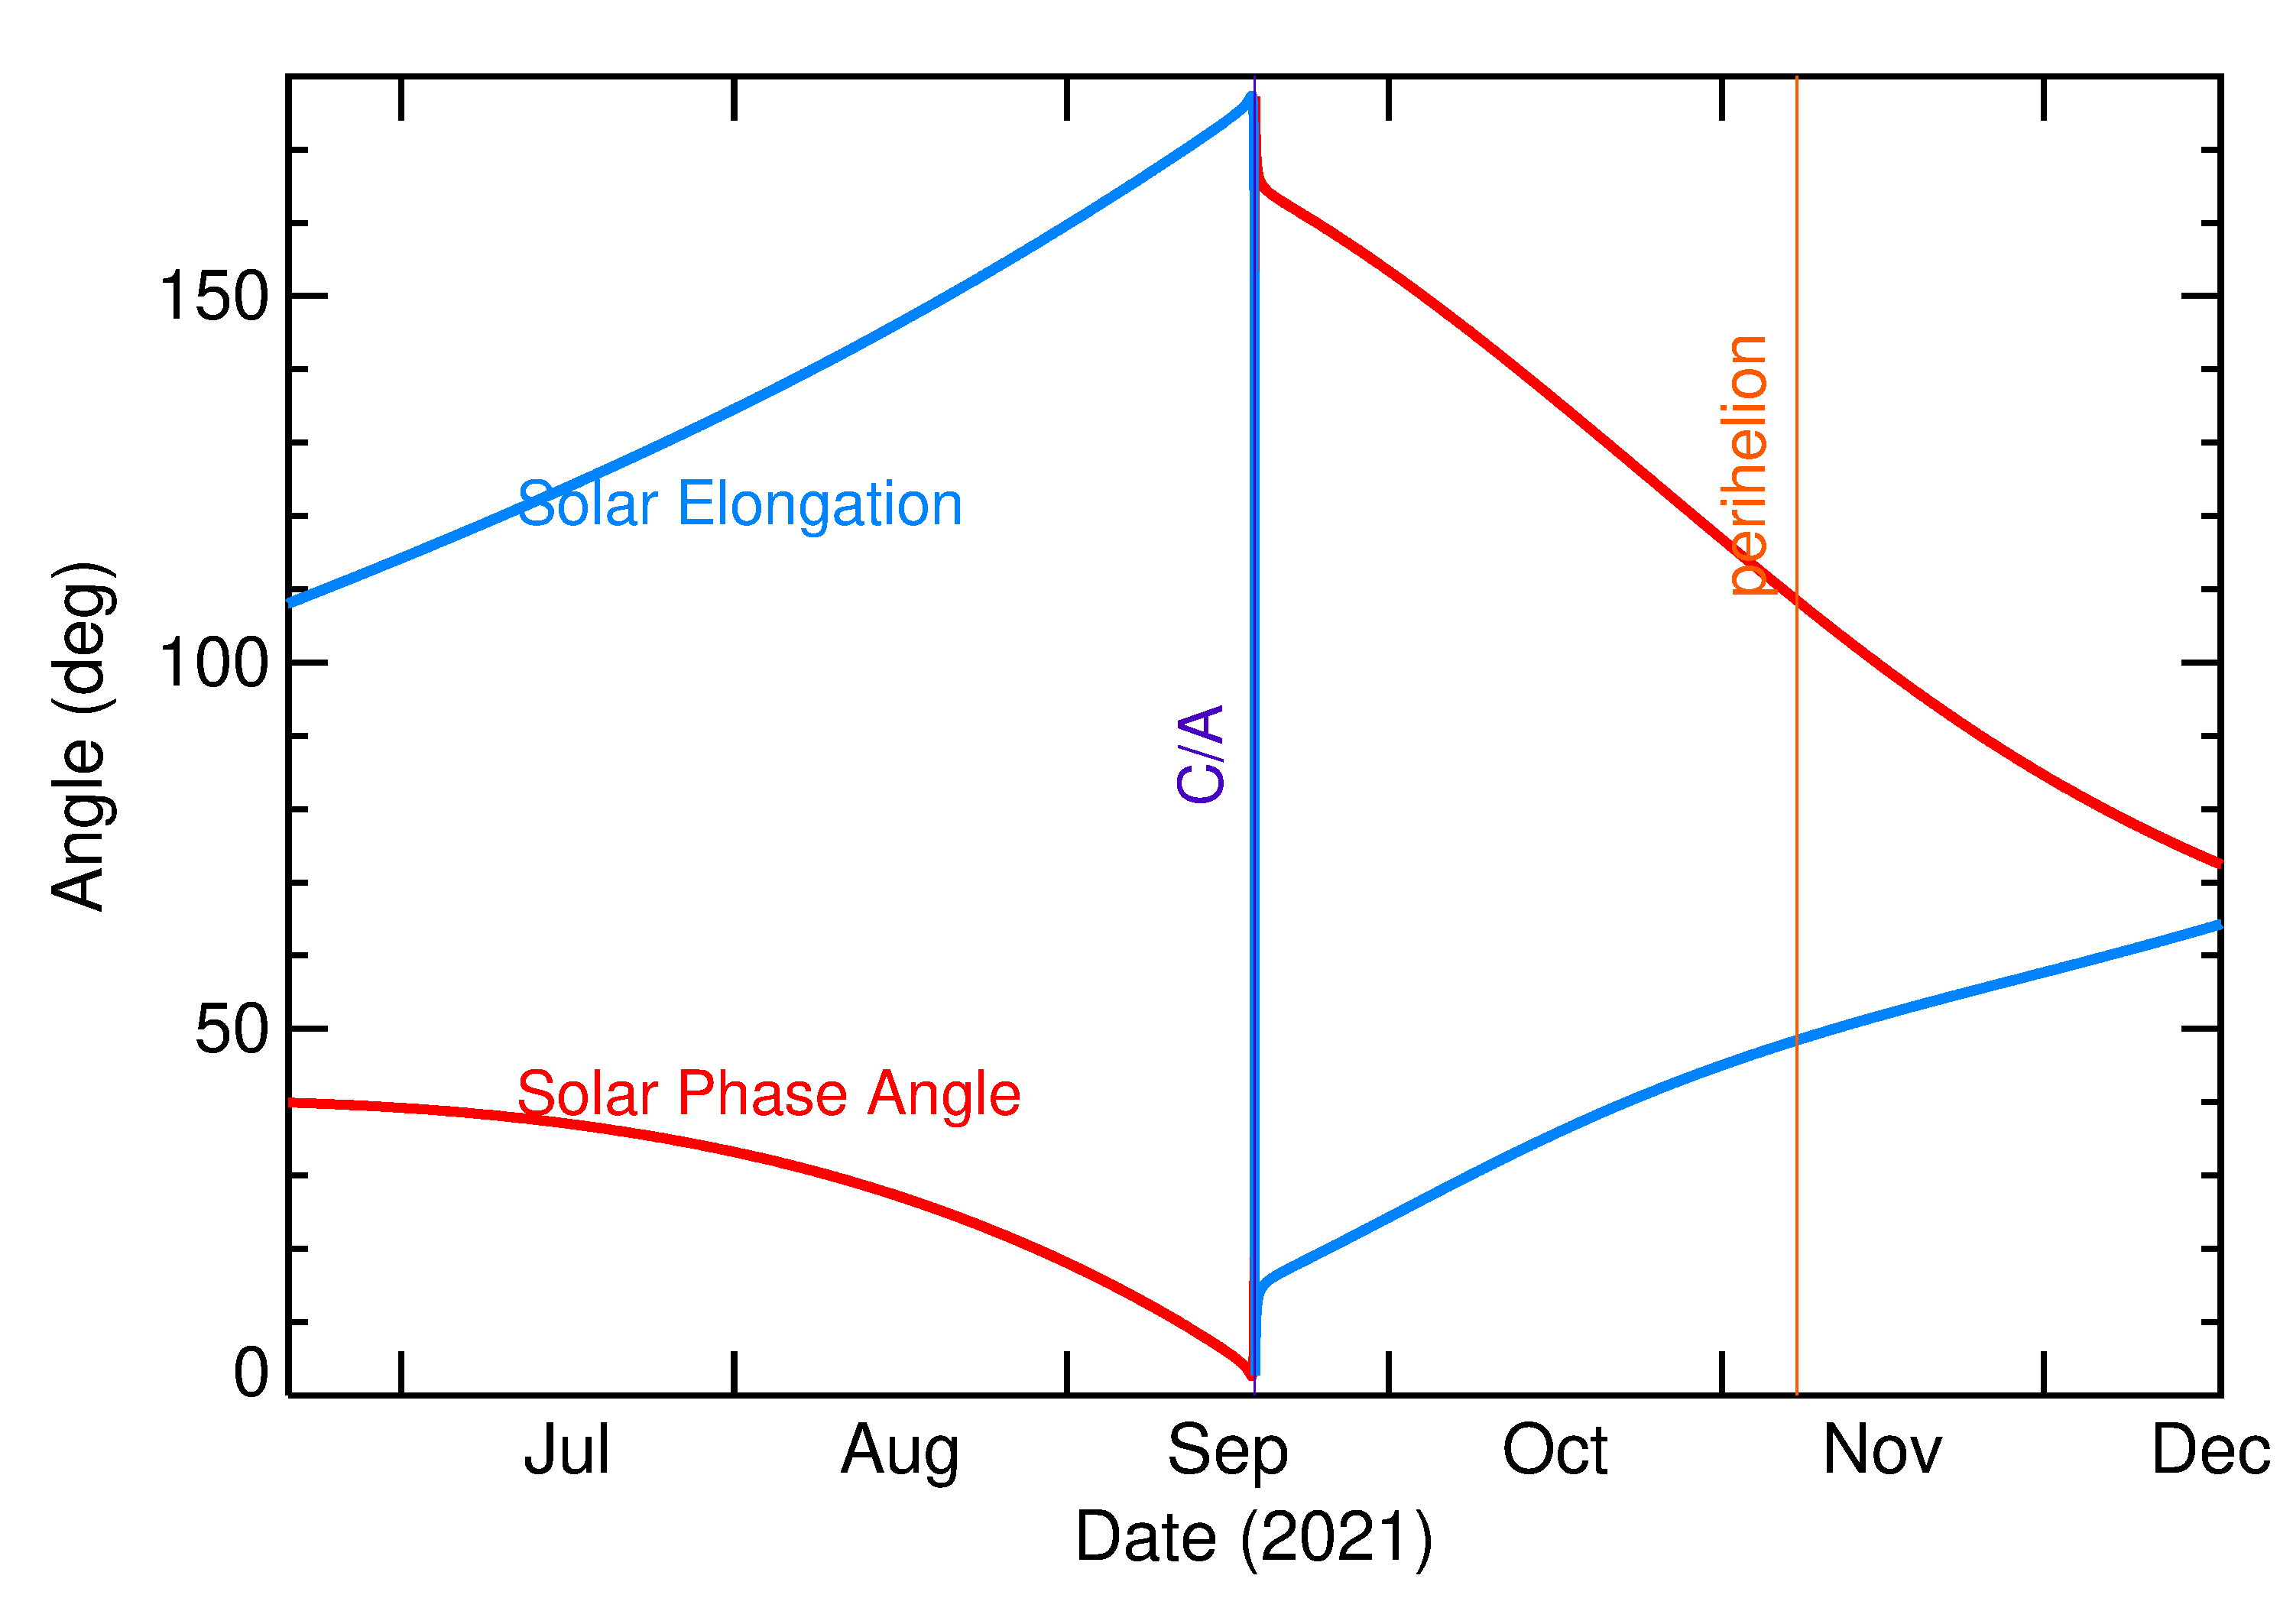 Solar Elongation and Solar Phase Angle of 2021 SP in the months around closest approach